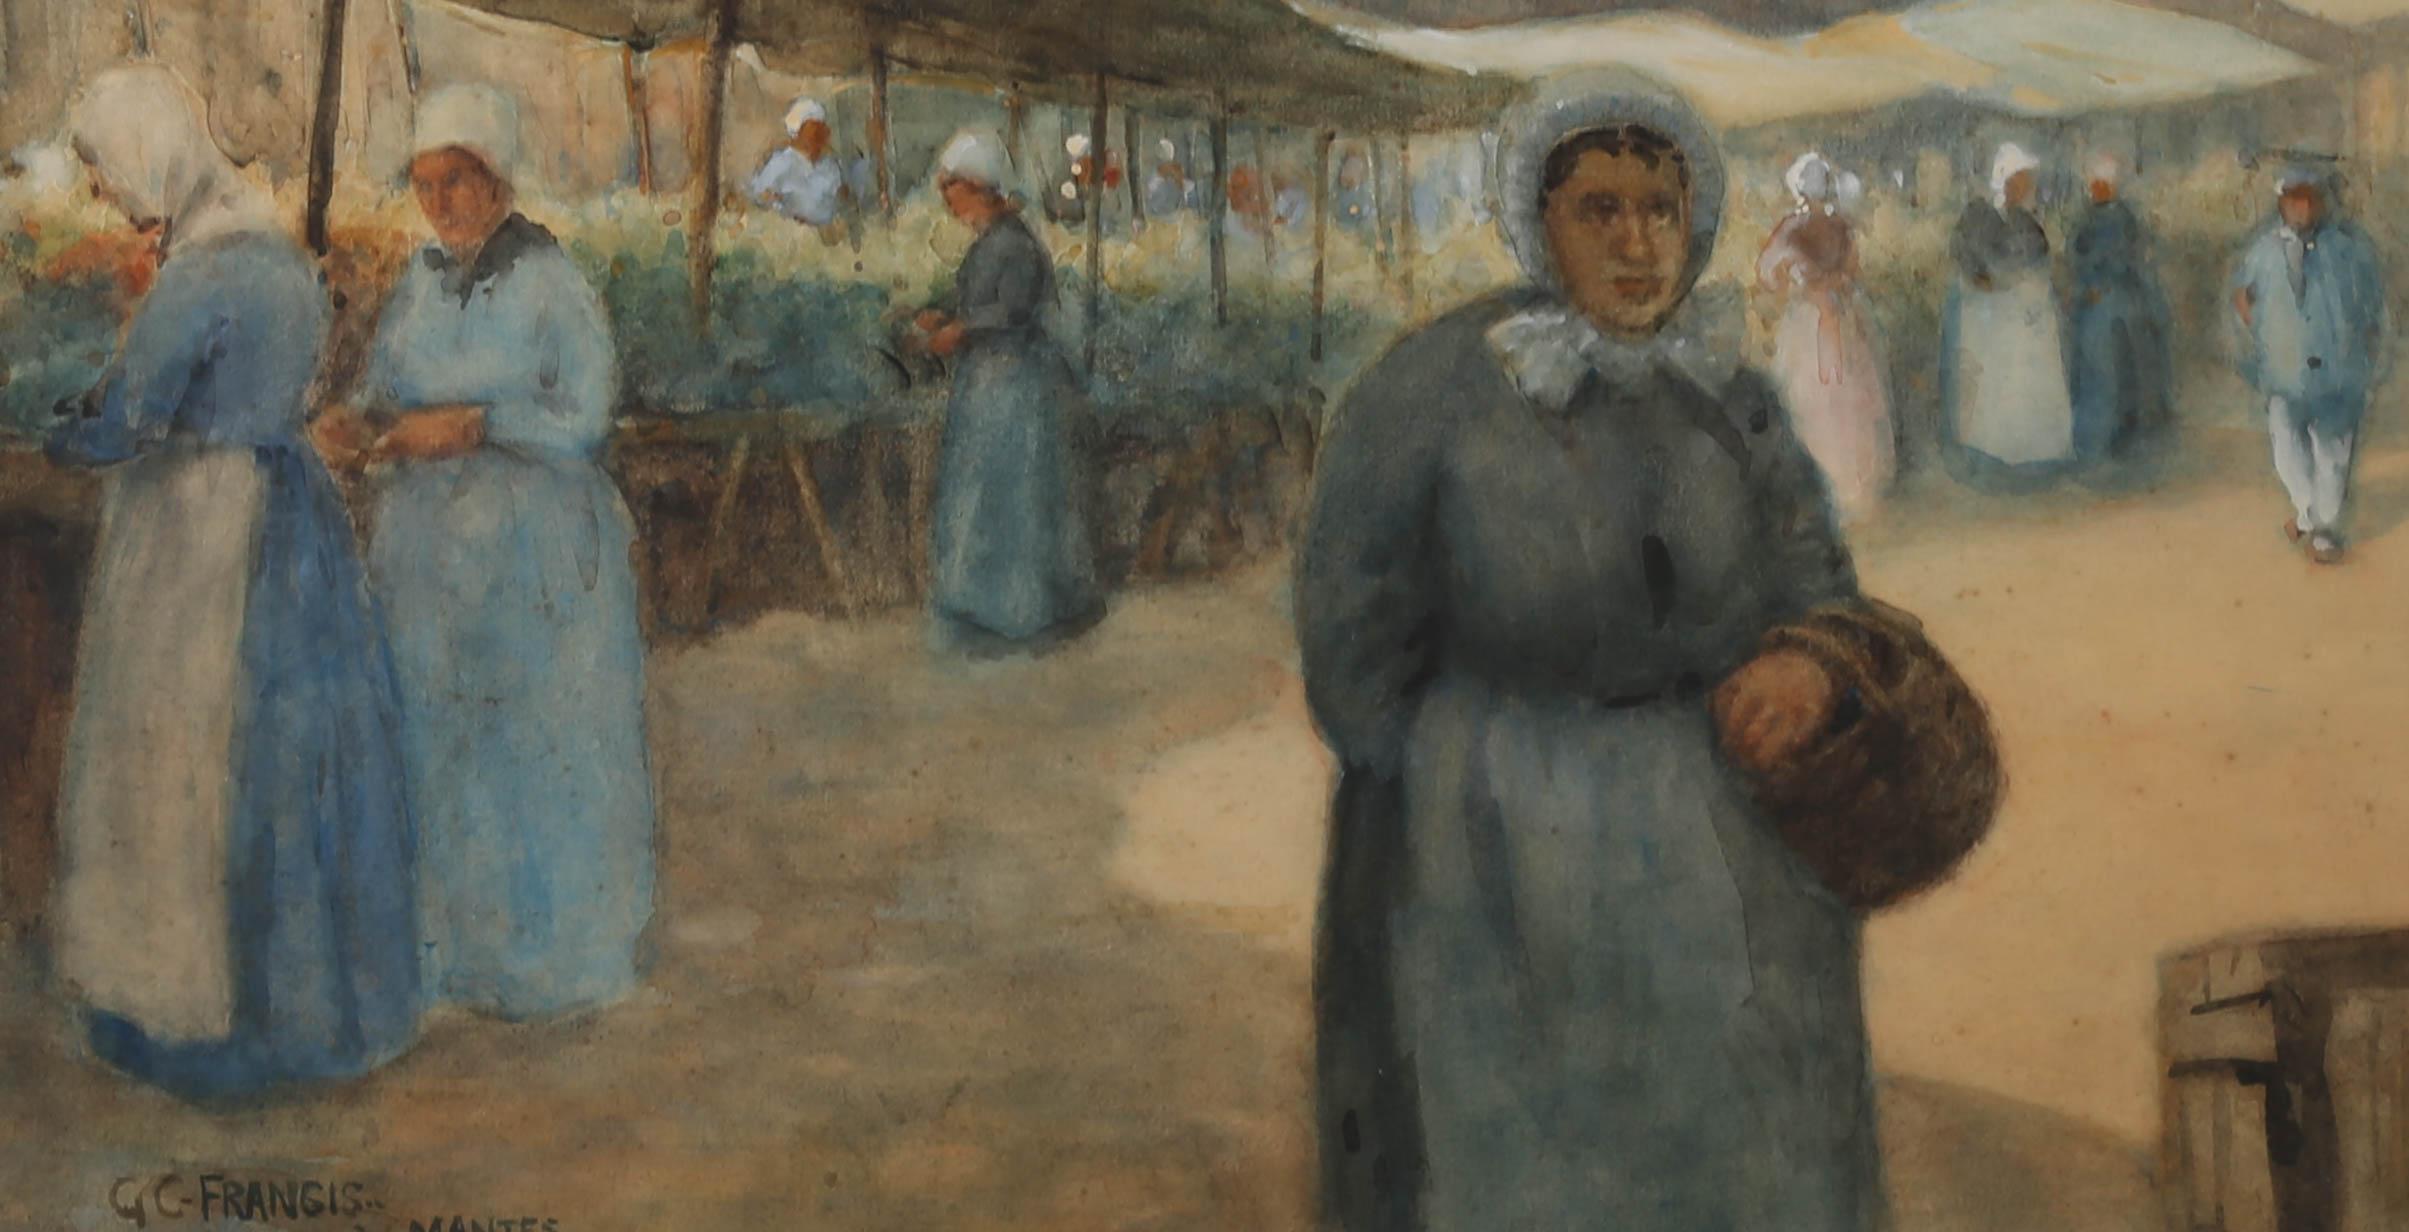 A wonderfully impressionist view of French market in Mantes-la-Jolie, France. Women gather at stalls under canopies, one woman walks towards the viewer in the foreground, a basket over her arm. The scene has a peaceful haziness and muted palette.